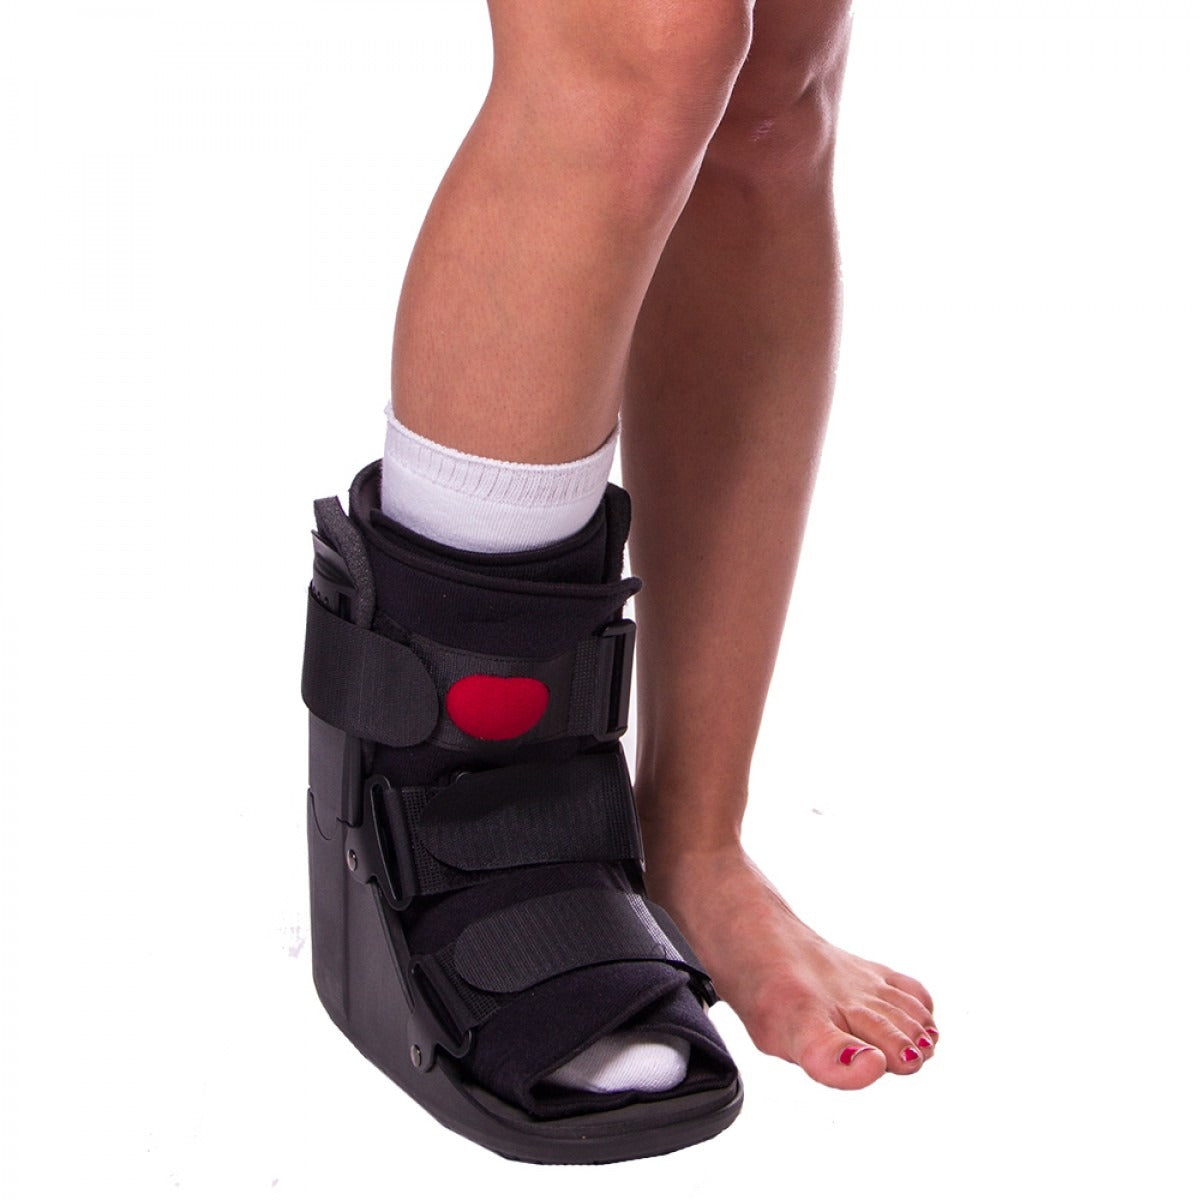 Wide footbed of this cam boot for broken foot care allows for swelling and bunion treatment